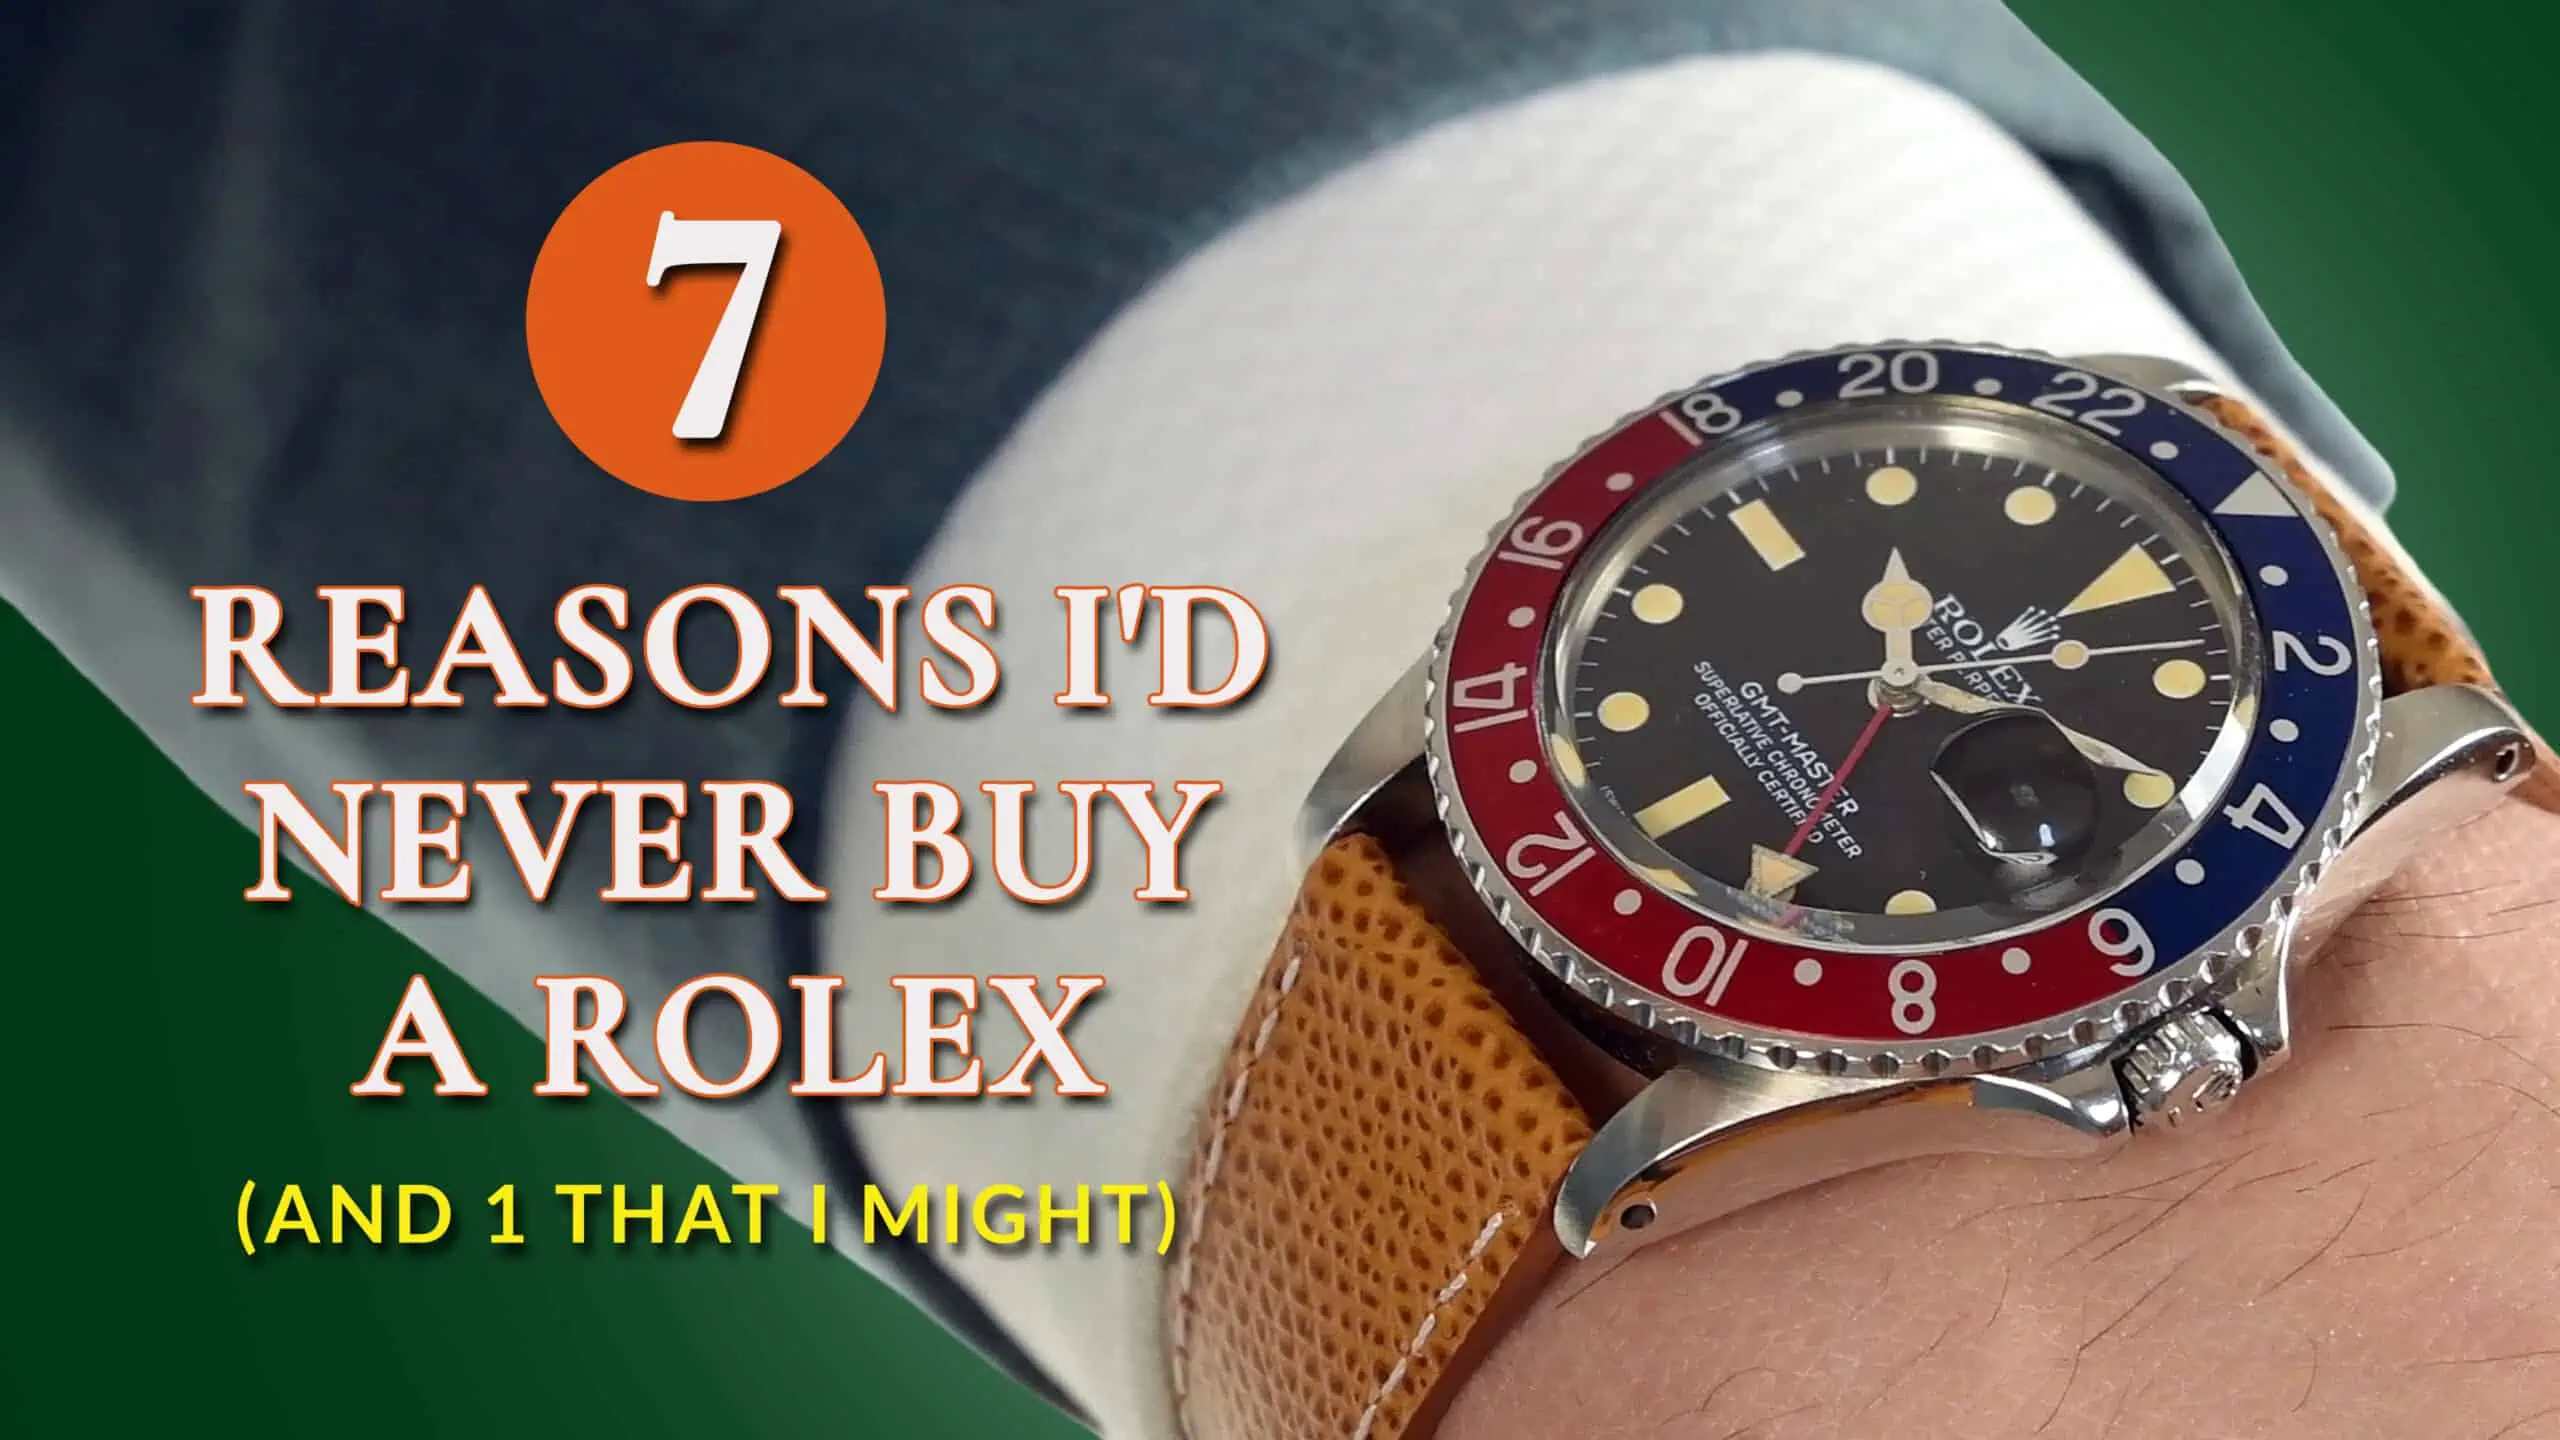 7 reasons id never buy a rolex 3840x2160 wp scaled